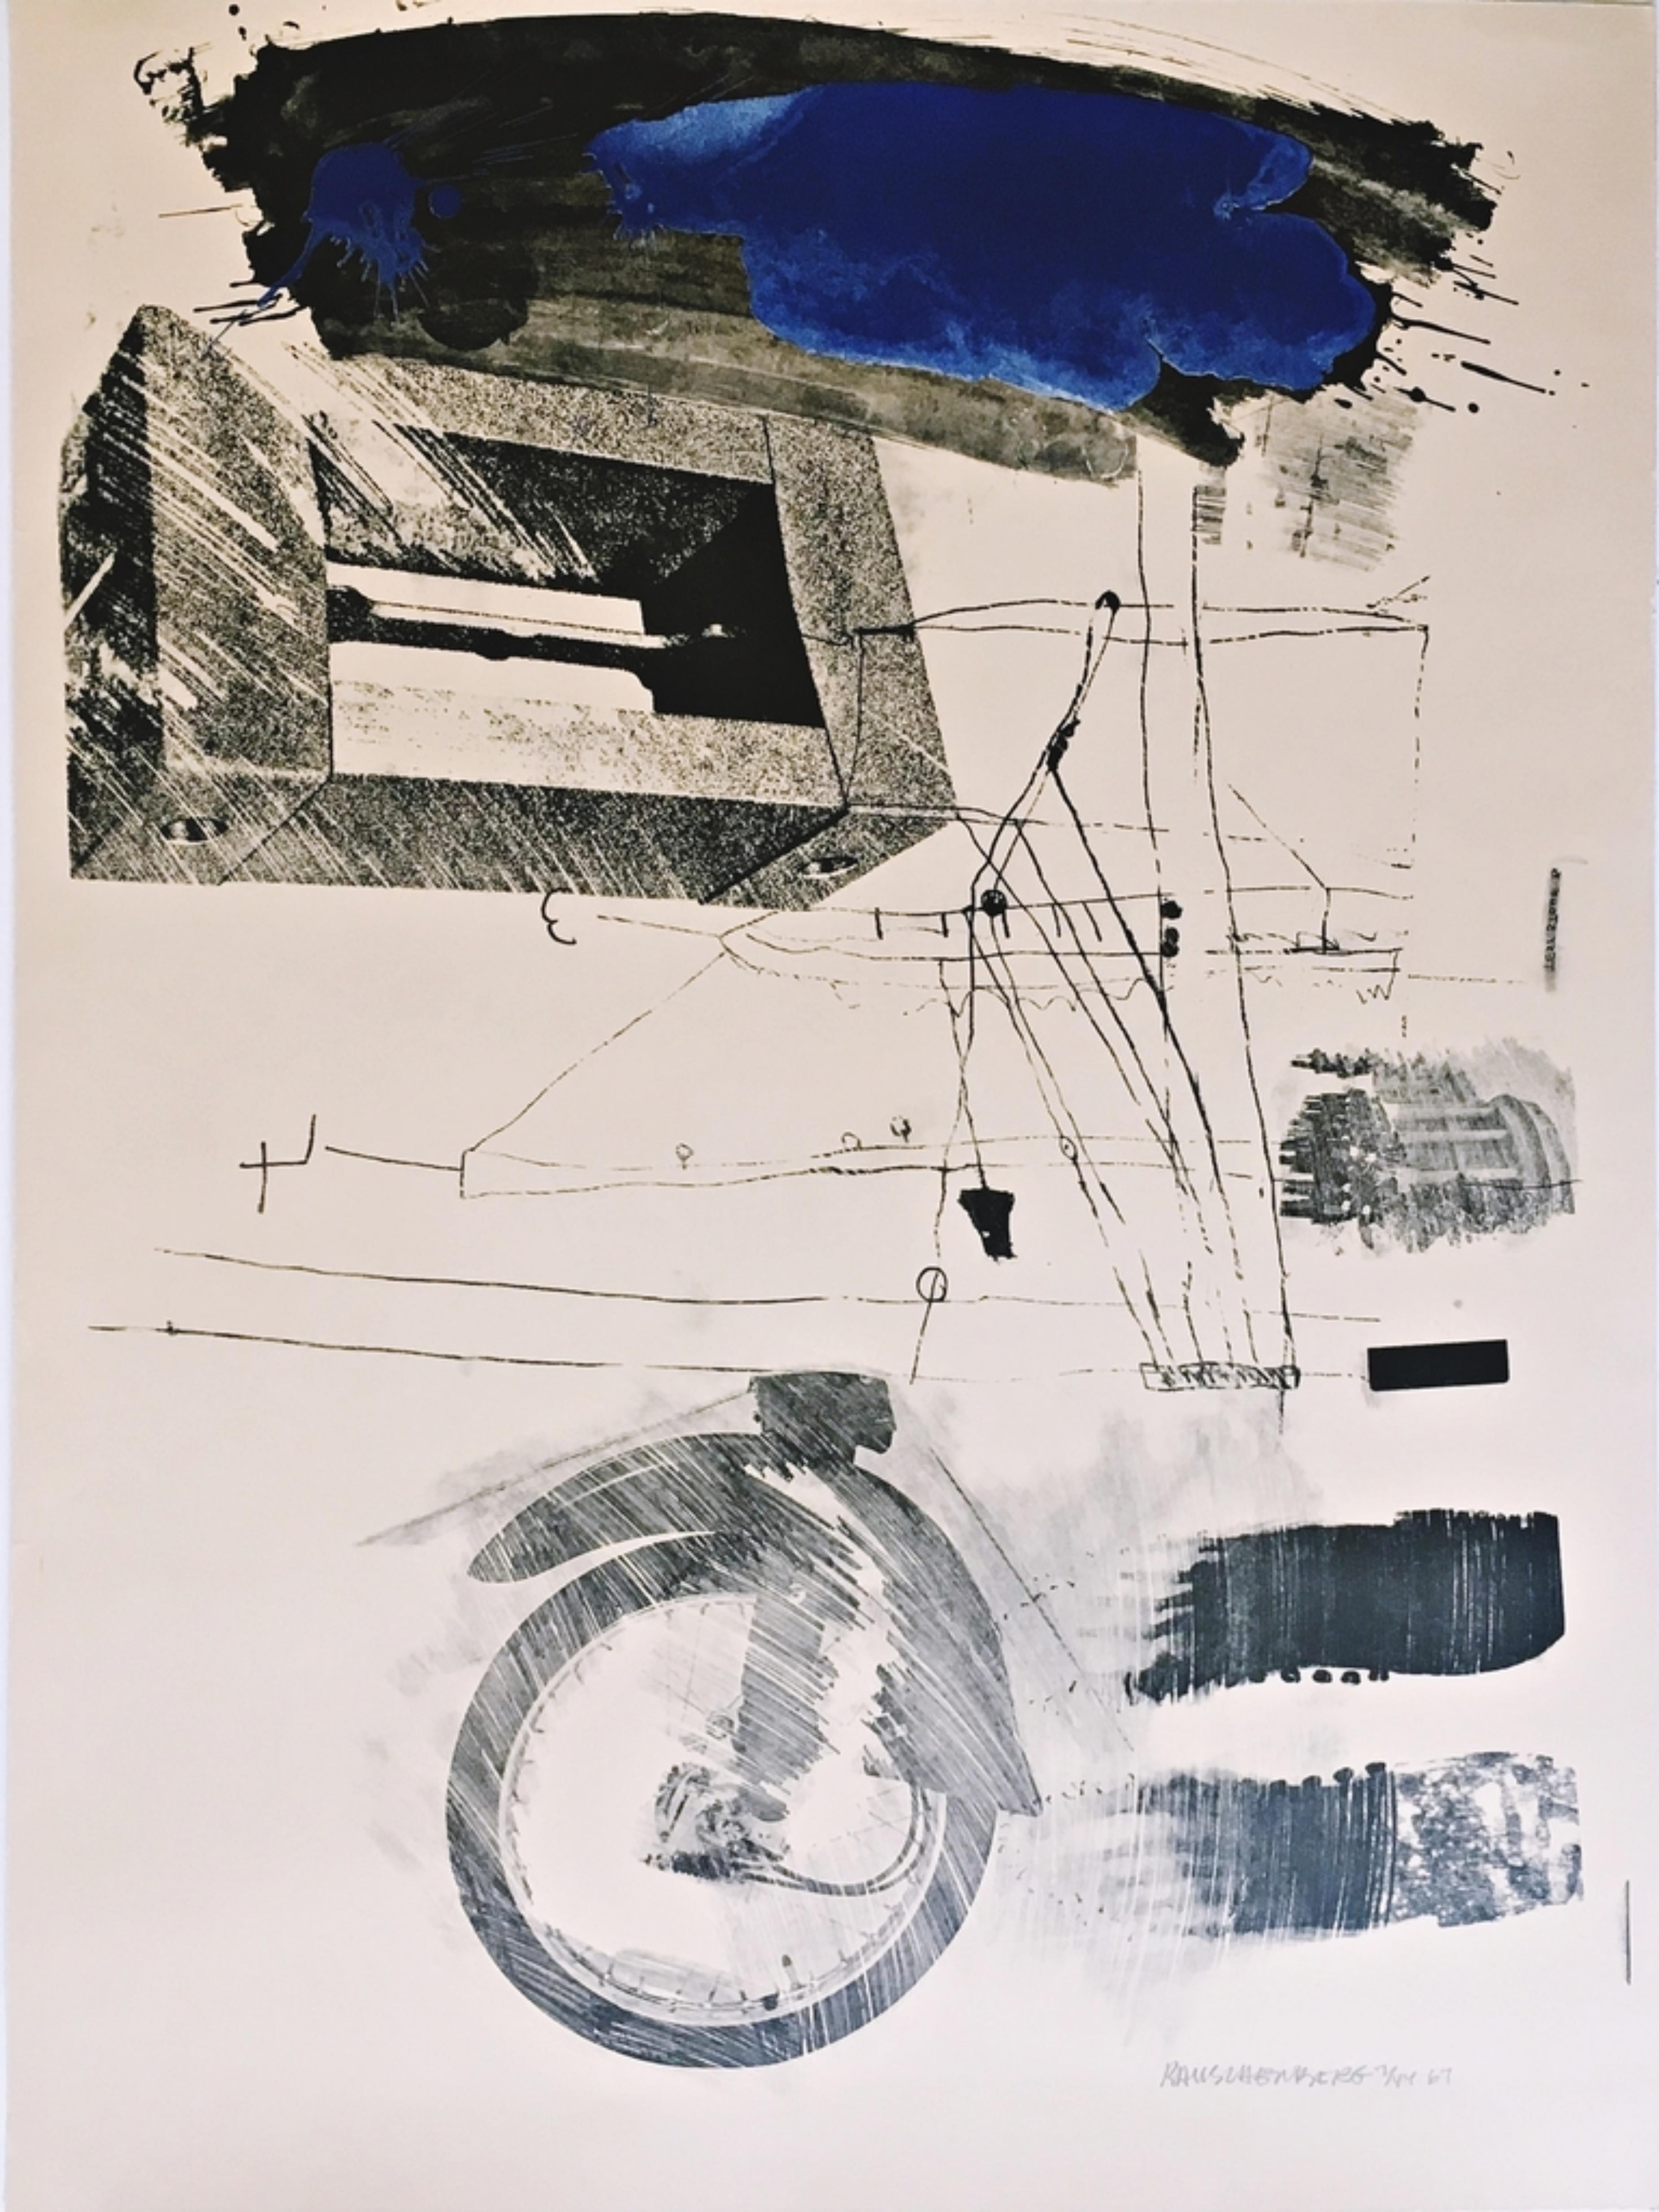 Robert Rauschenberg Figurative Print - Test Stone #6, from the Booster and 7 Studies Series (Foster, 45, G:33)